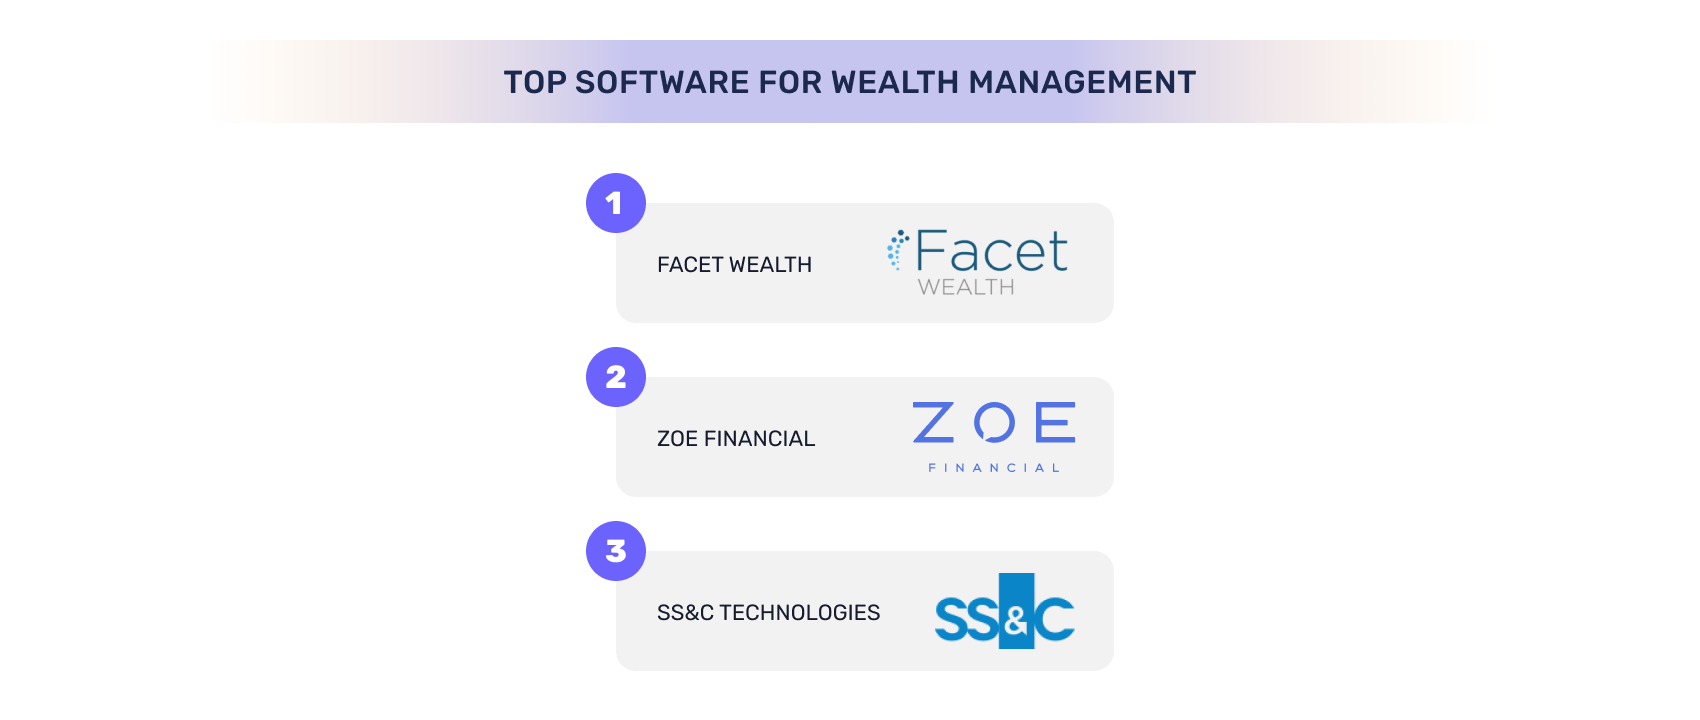 Top Software for Wealth Management